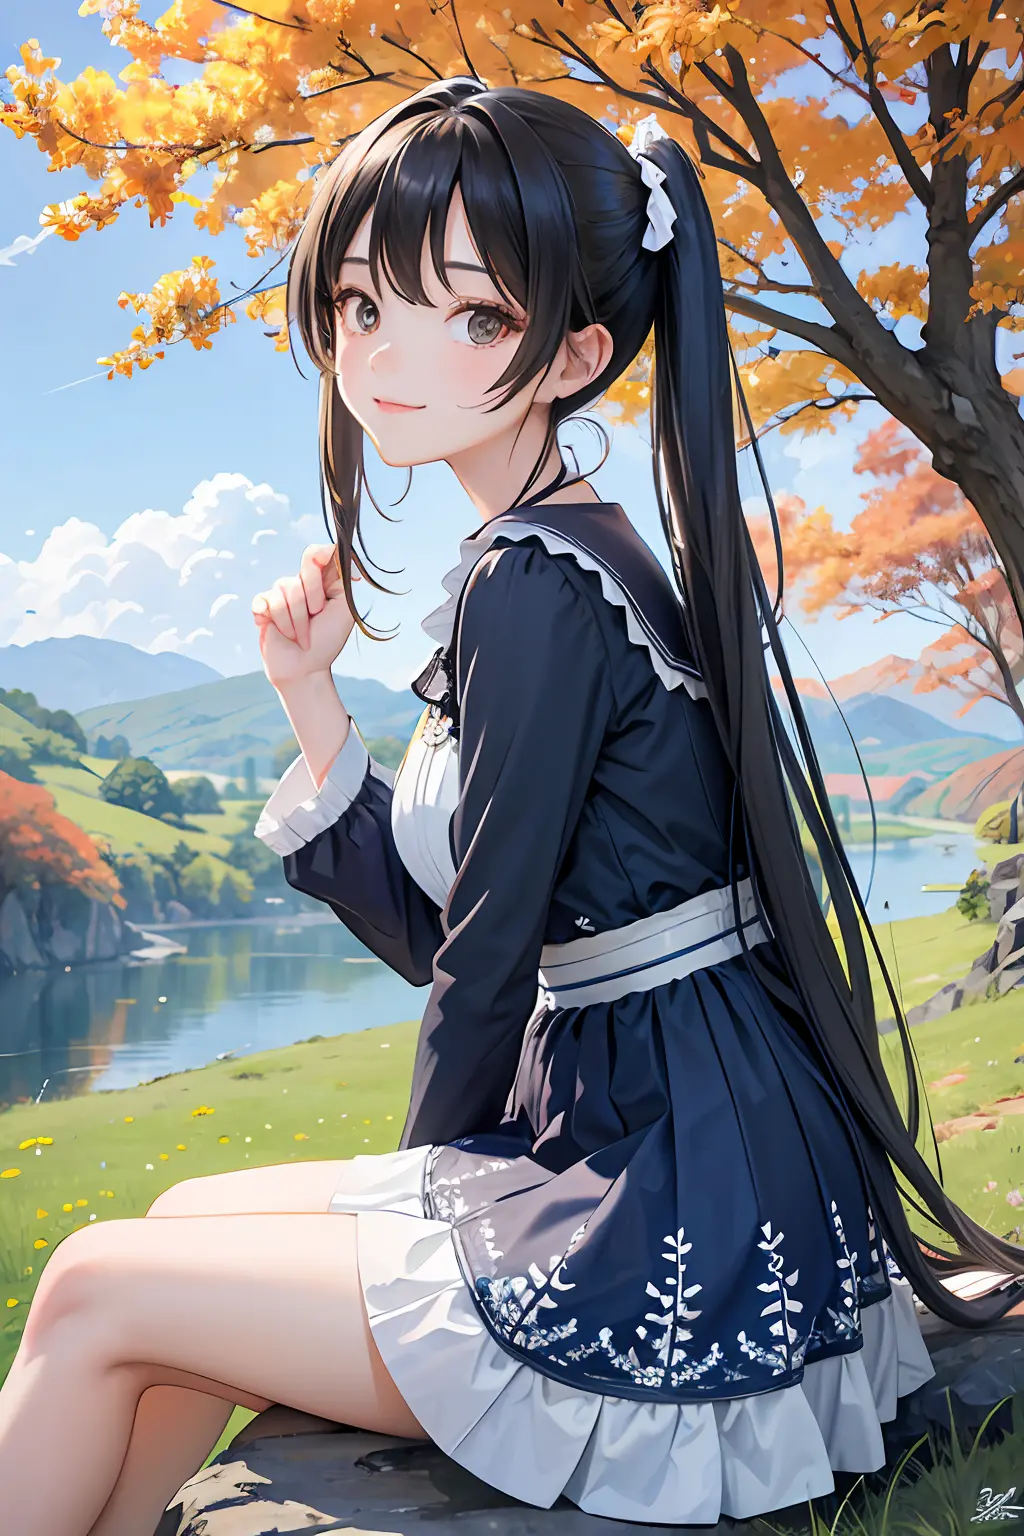 masterpiece, best quality, (grainy:0.7), intricate detail, sharp, perfect anatomy, finely detailed, bloom, noon, vivid colors
BREAK
cute girl, watching birds, leaning on hand, detailed eyes, from side, sitting on rock, twintails, detailed trees, autumn, gr...